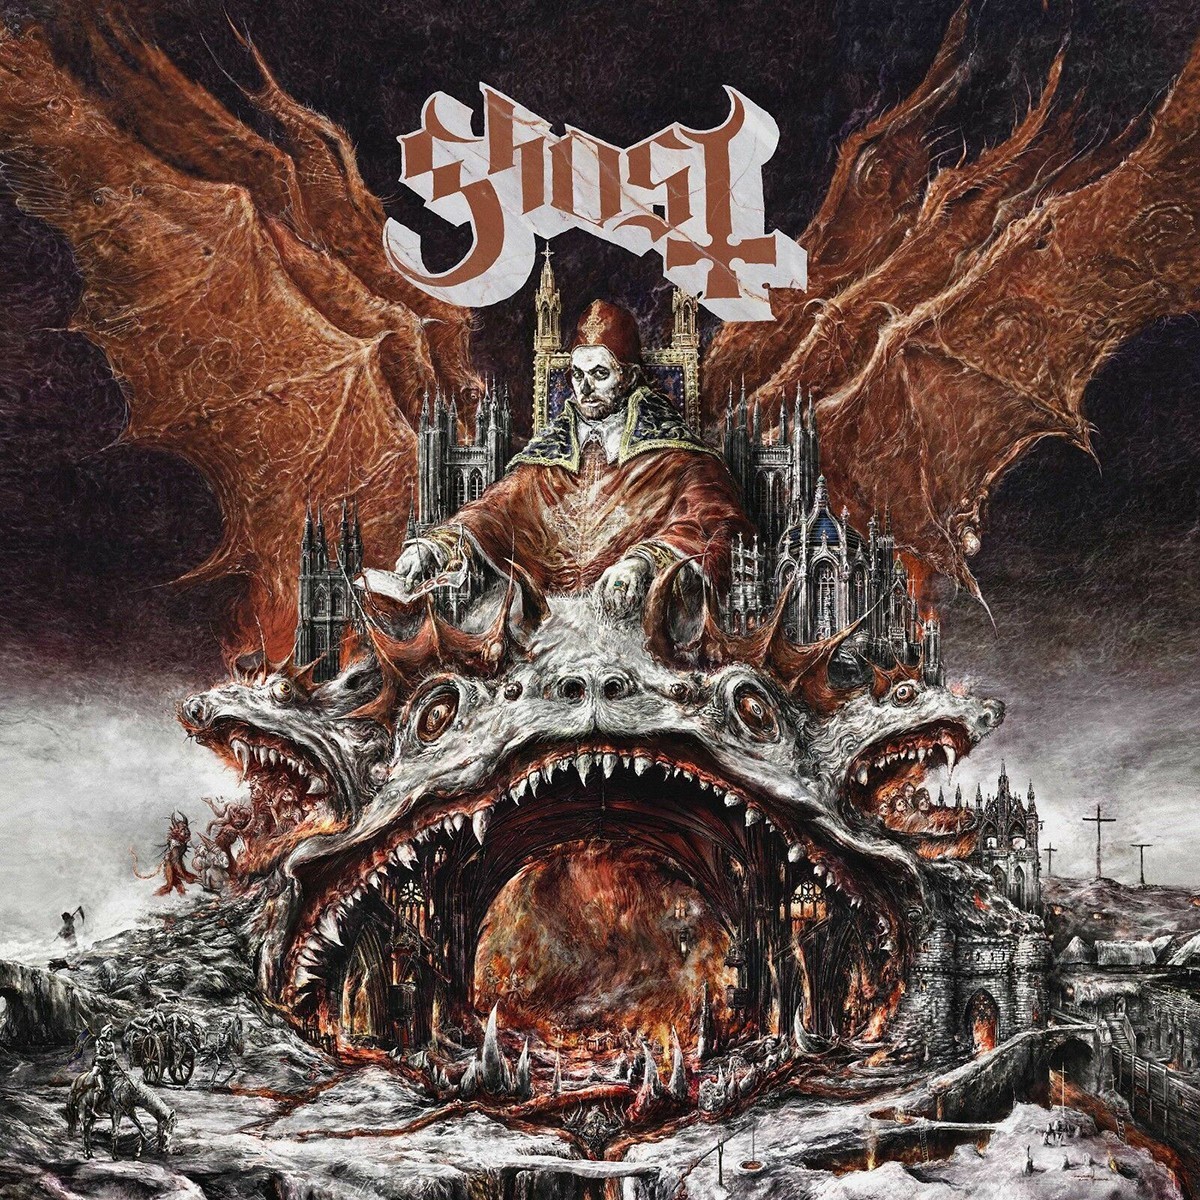 Cover of the album "Prequelle" by the group "Ghost"